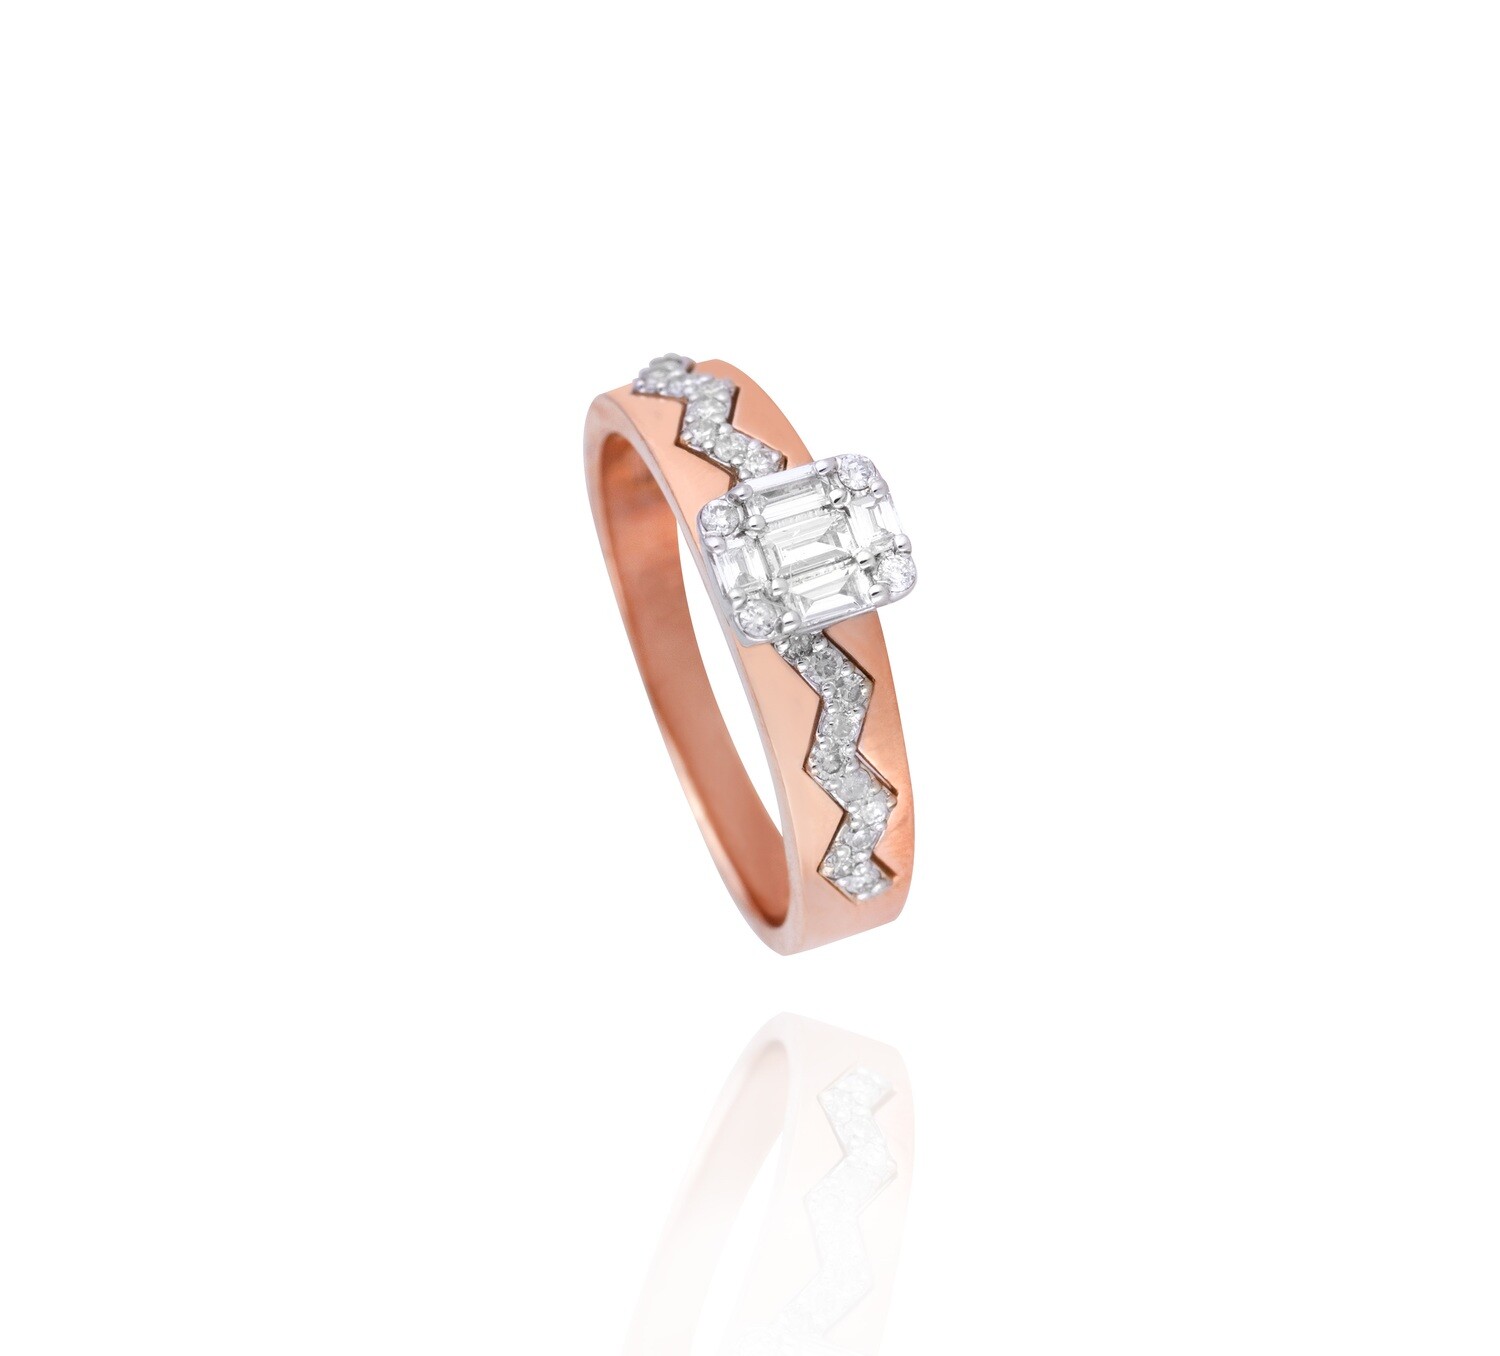 Solitaire Diamond Engagement Ring with Baguette Diamond